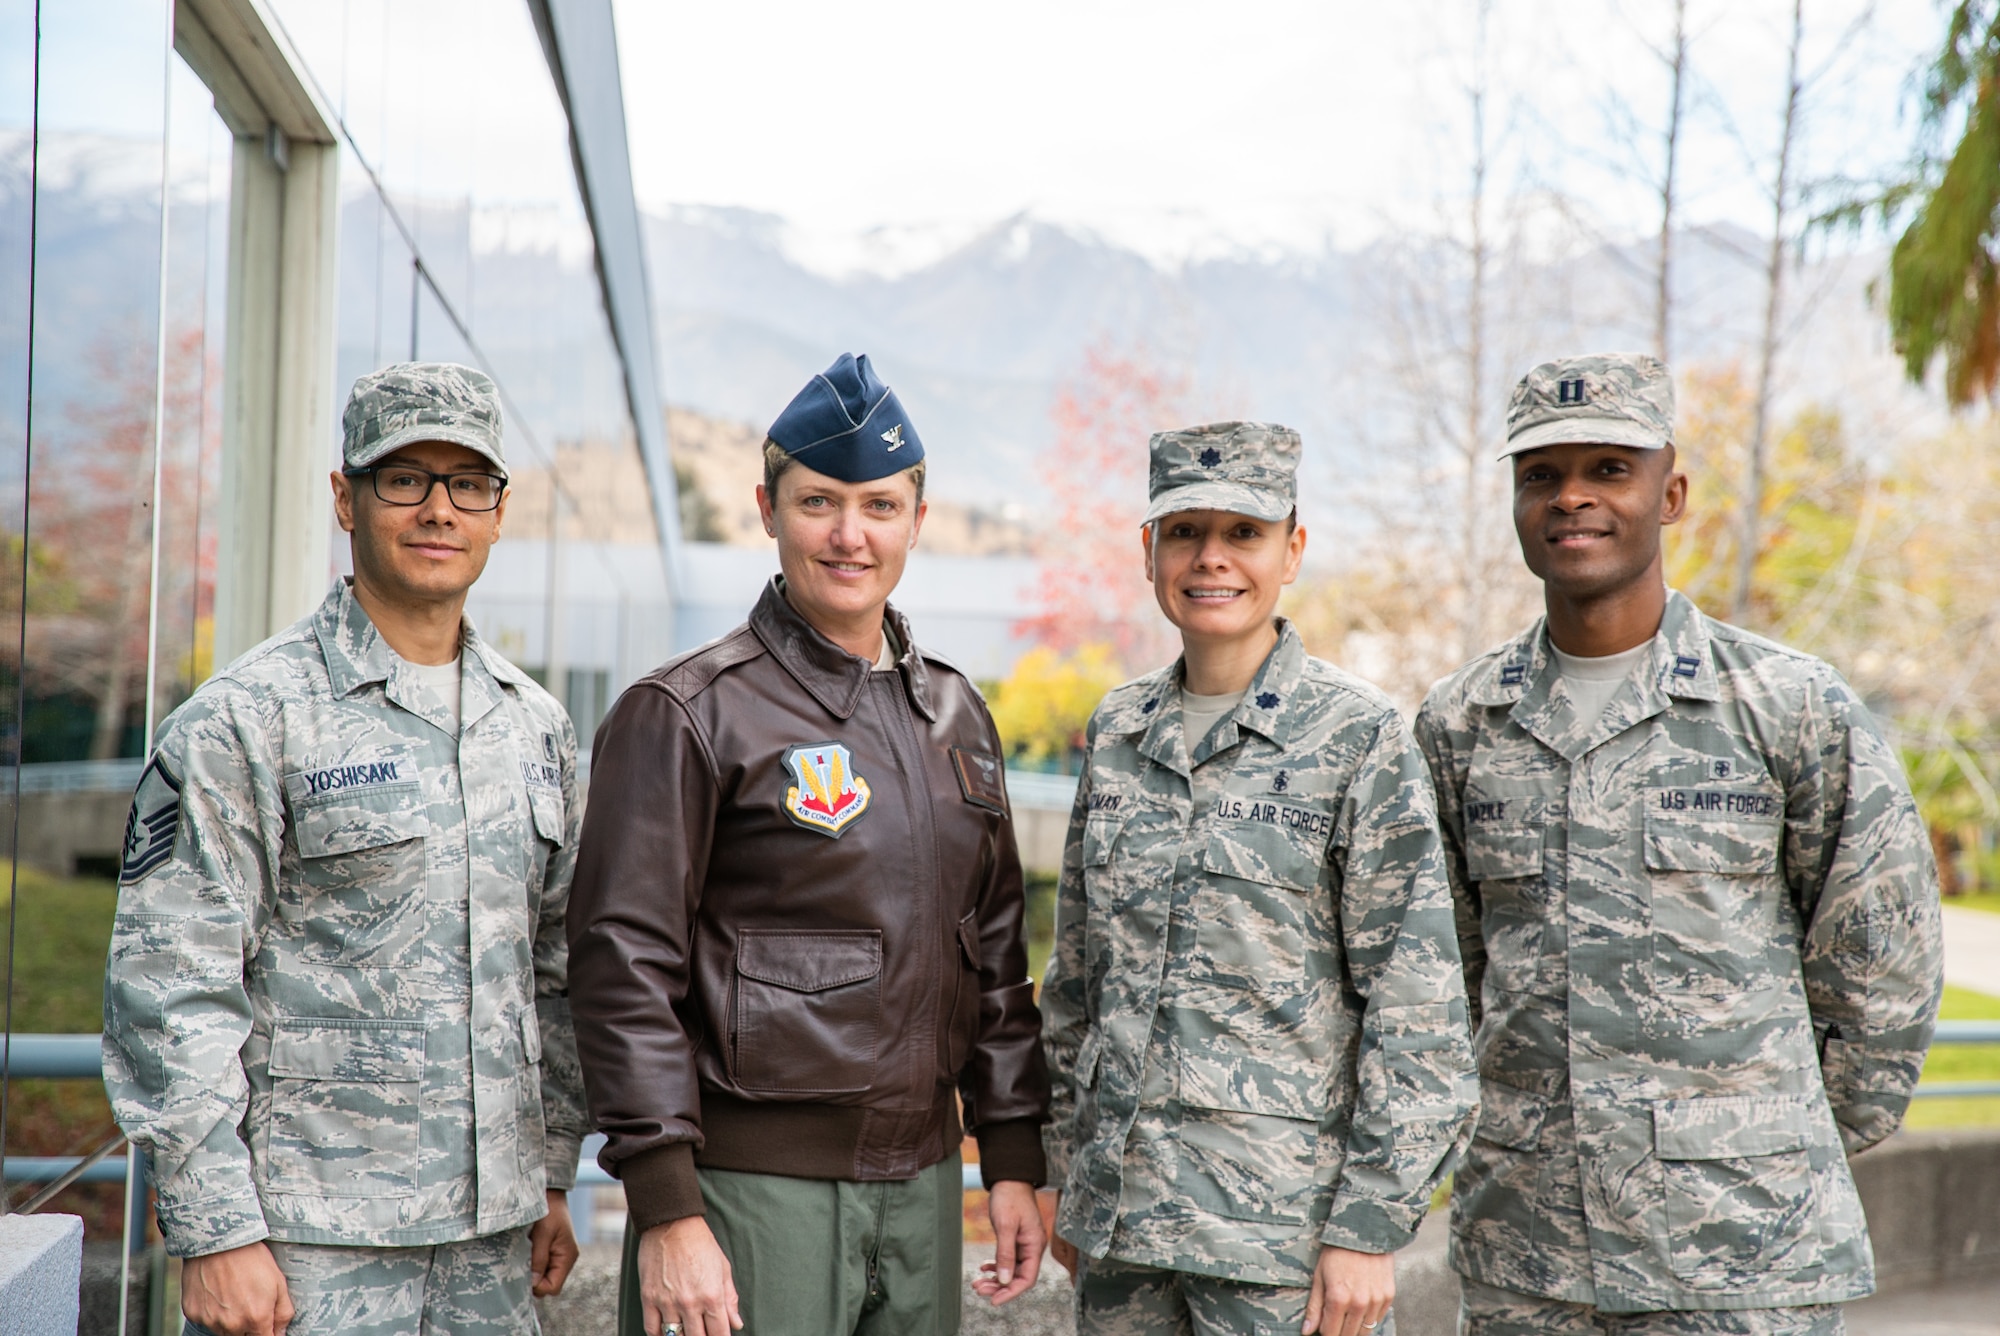 Master Sgt. Diego Yoshisaki, 12th Air Force (AFSOUTH) international health specialist, Davis-Monthan AFB, AZ., Col. Colleen McBratney, 355th Aerospace Medicine Squadron Commander, Davis-Monthan AFB, AZ., Lt. Col. Lisa Guzman, 87th Medical Group medical services administrator, Joint Base McGuire-Dix-Lakehurst, N.J., and Capt. Angelo Bazile, 11th Wing medical services administrator, Joint Base Andrews, MD., pose for a  photo during a health services administration subject matter expert exchange with the Chilean Air Force at the Hospital Clínico, Santiago, June 4-8.